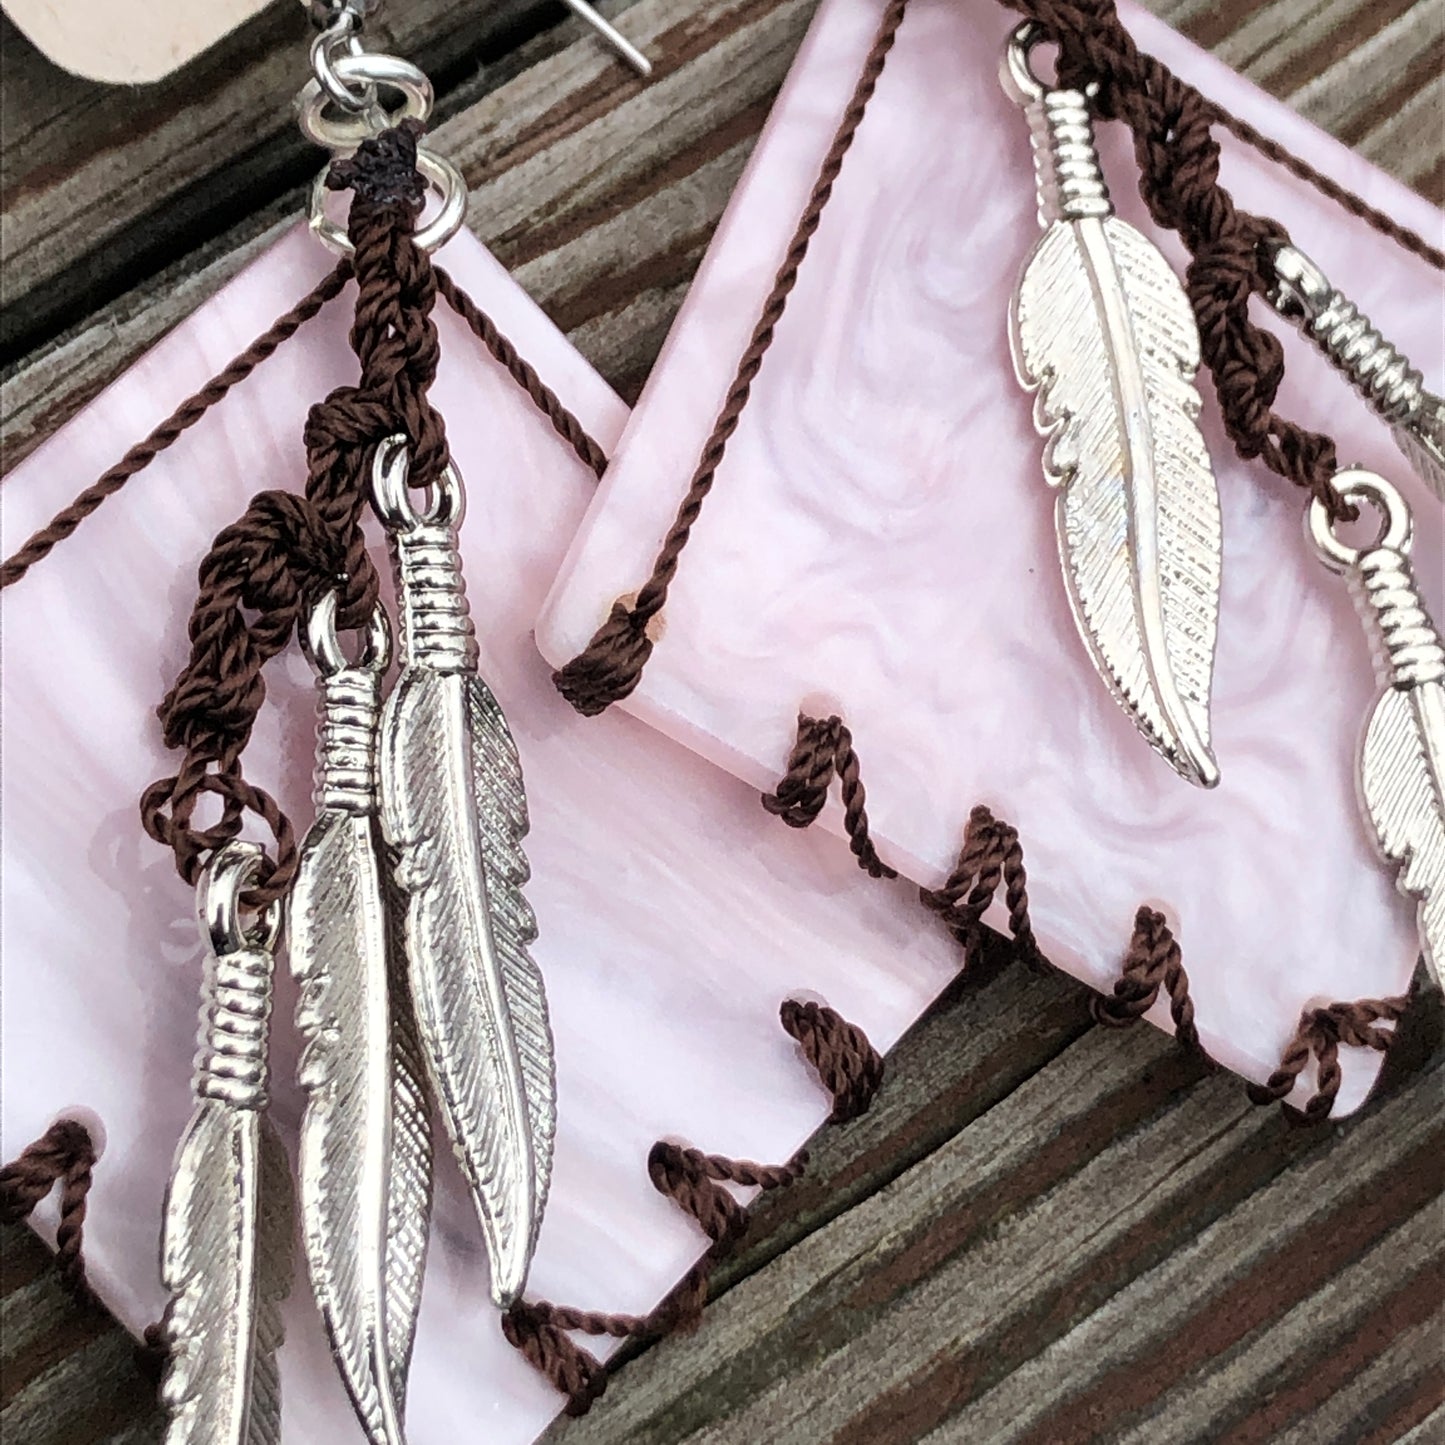 Pink Acrylic, Silver Feathers and a Brown Cotton Weave, Lightweight Earrings